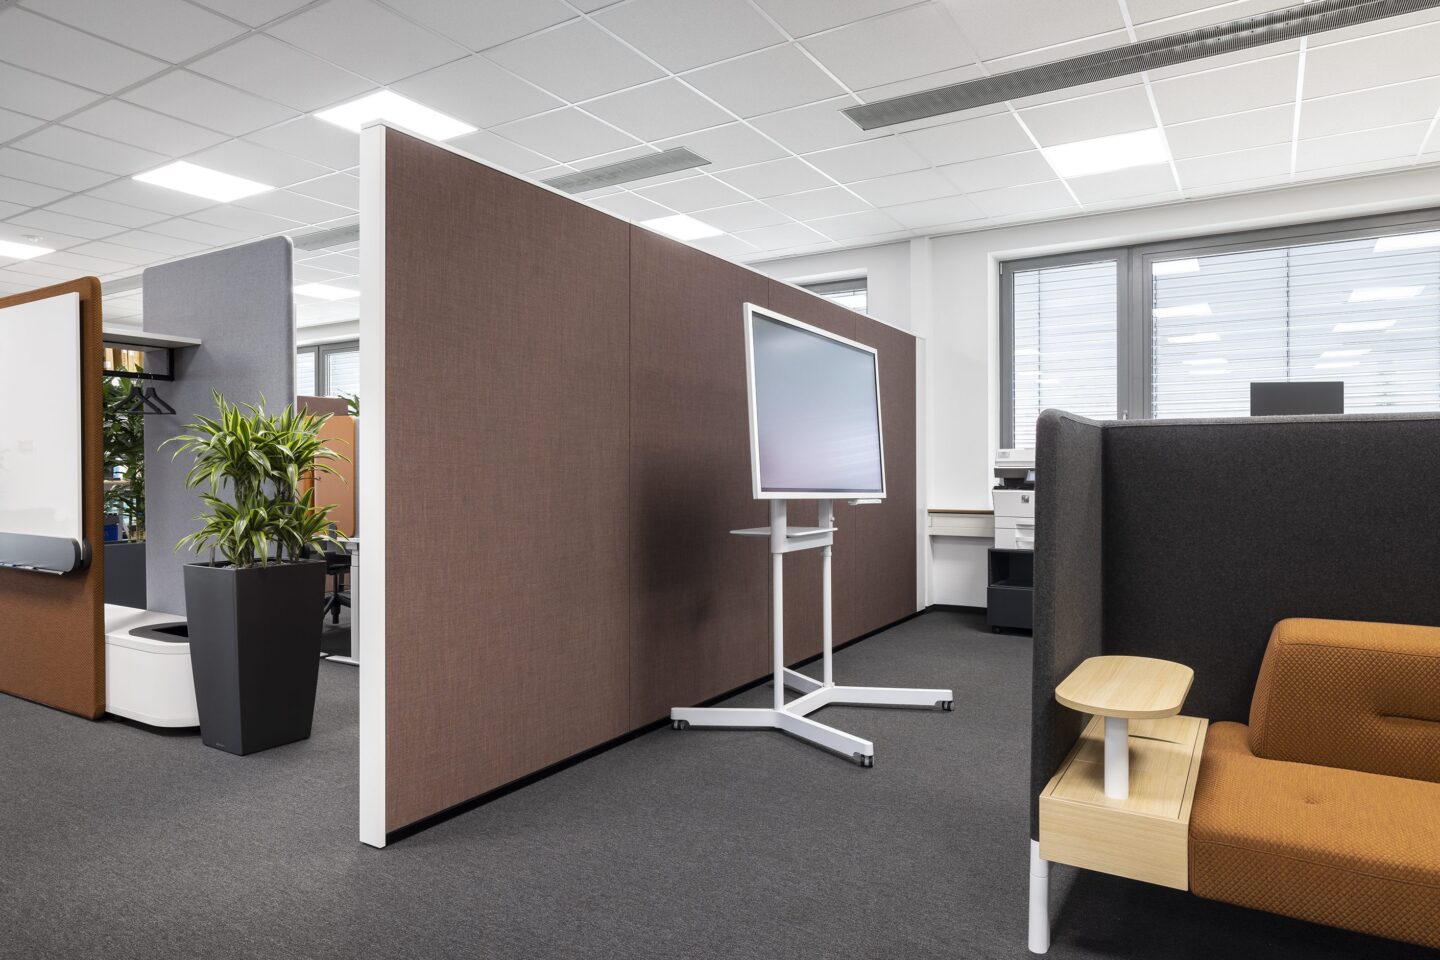 Seeburger Bretten │ new working environment at the company headquarters │ agile project work